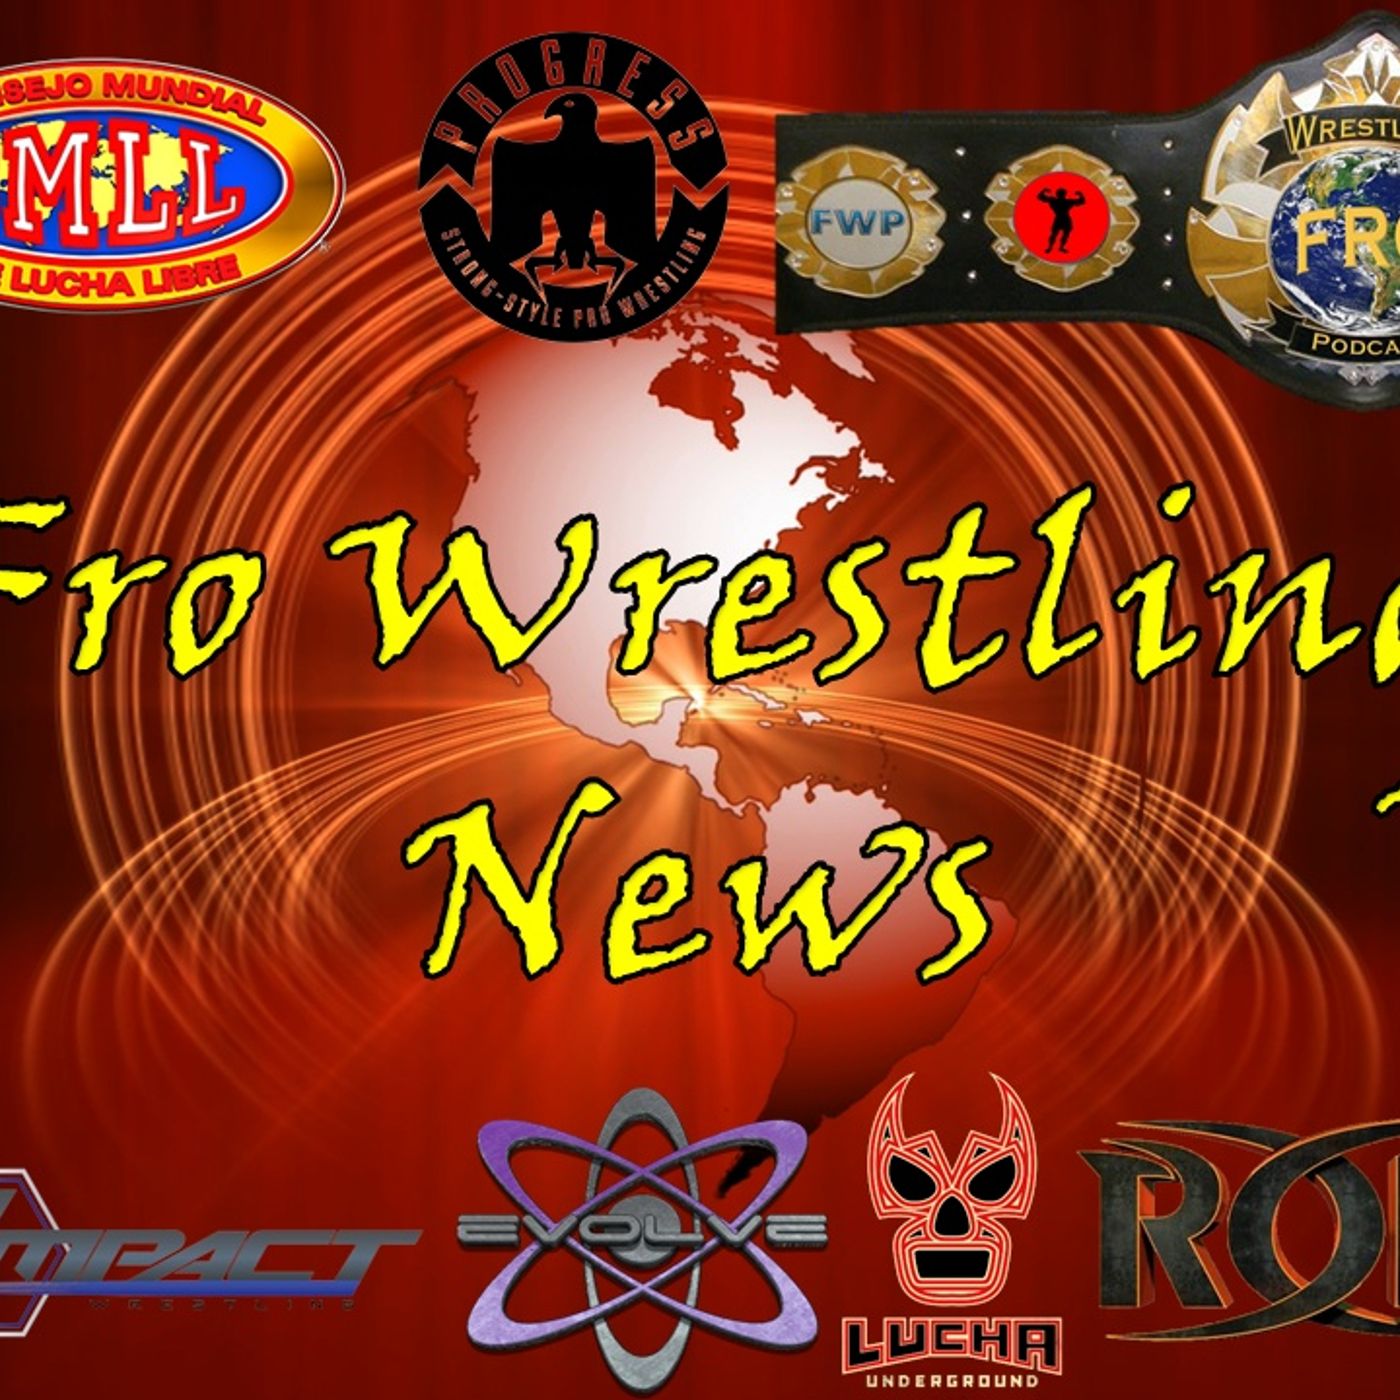 Fro Wrestling News - Shawn Michaels Return Possible!